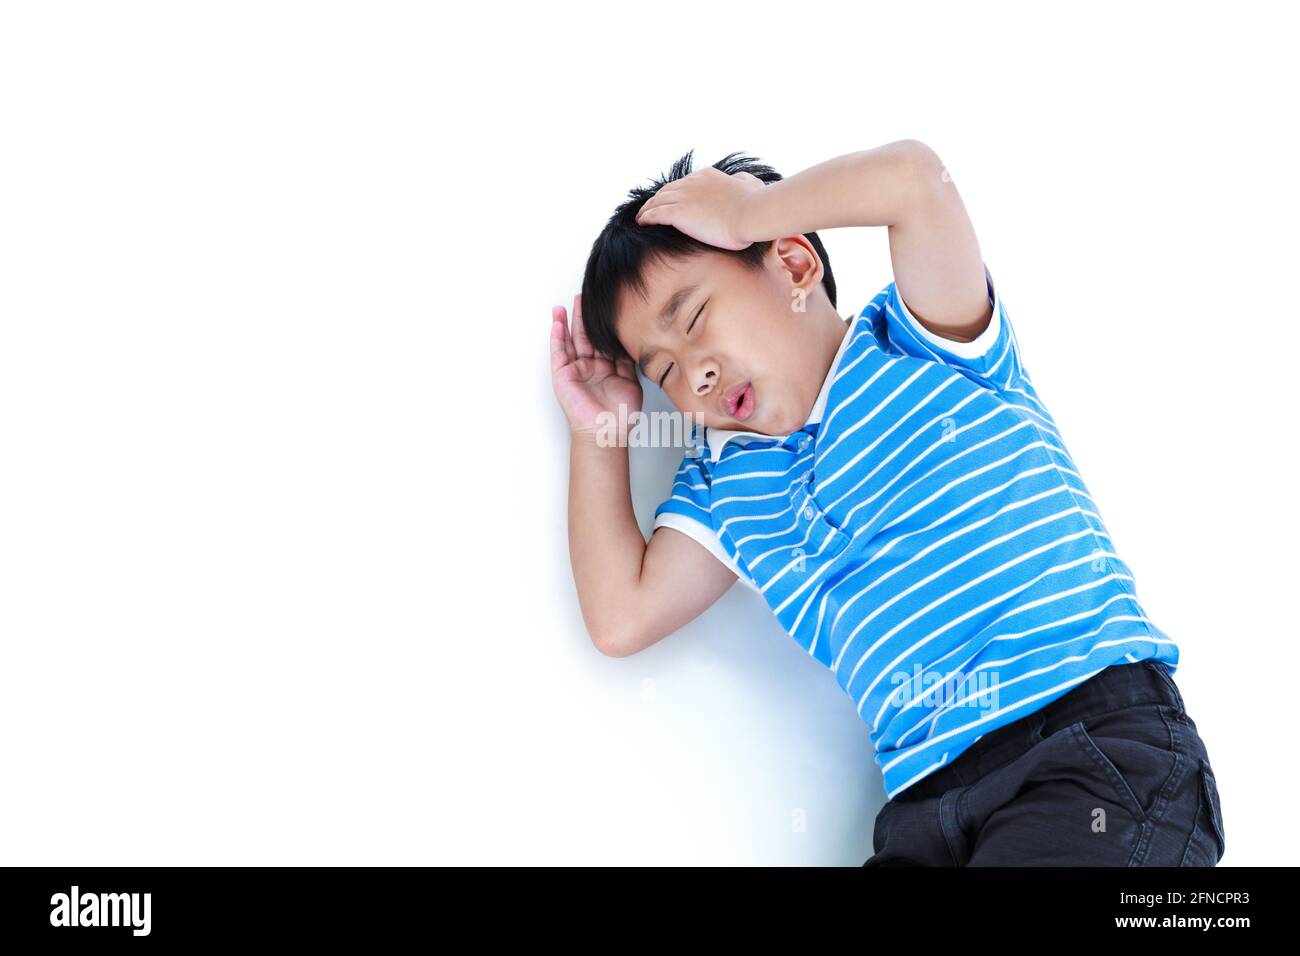 Top view child lie down. Asian boy have a headache, his hand on head, emotion feeling sign. Isolated on white background. Negative human emotion, faci Stock Photo